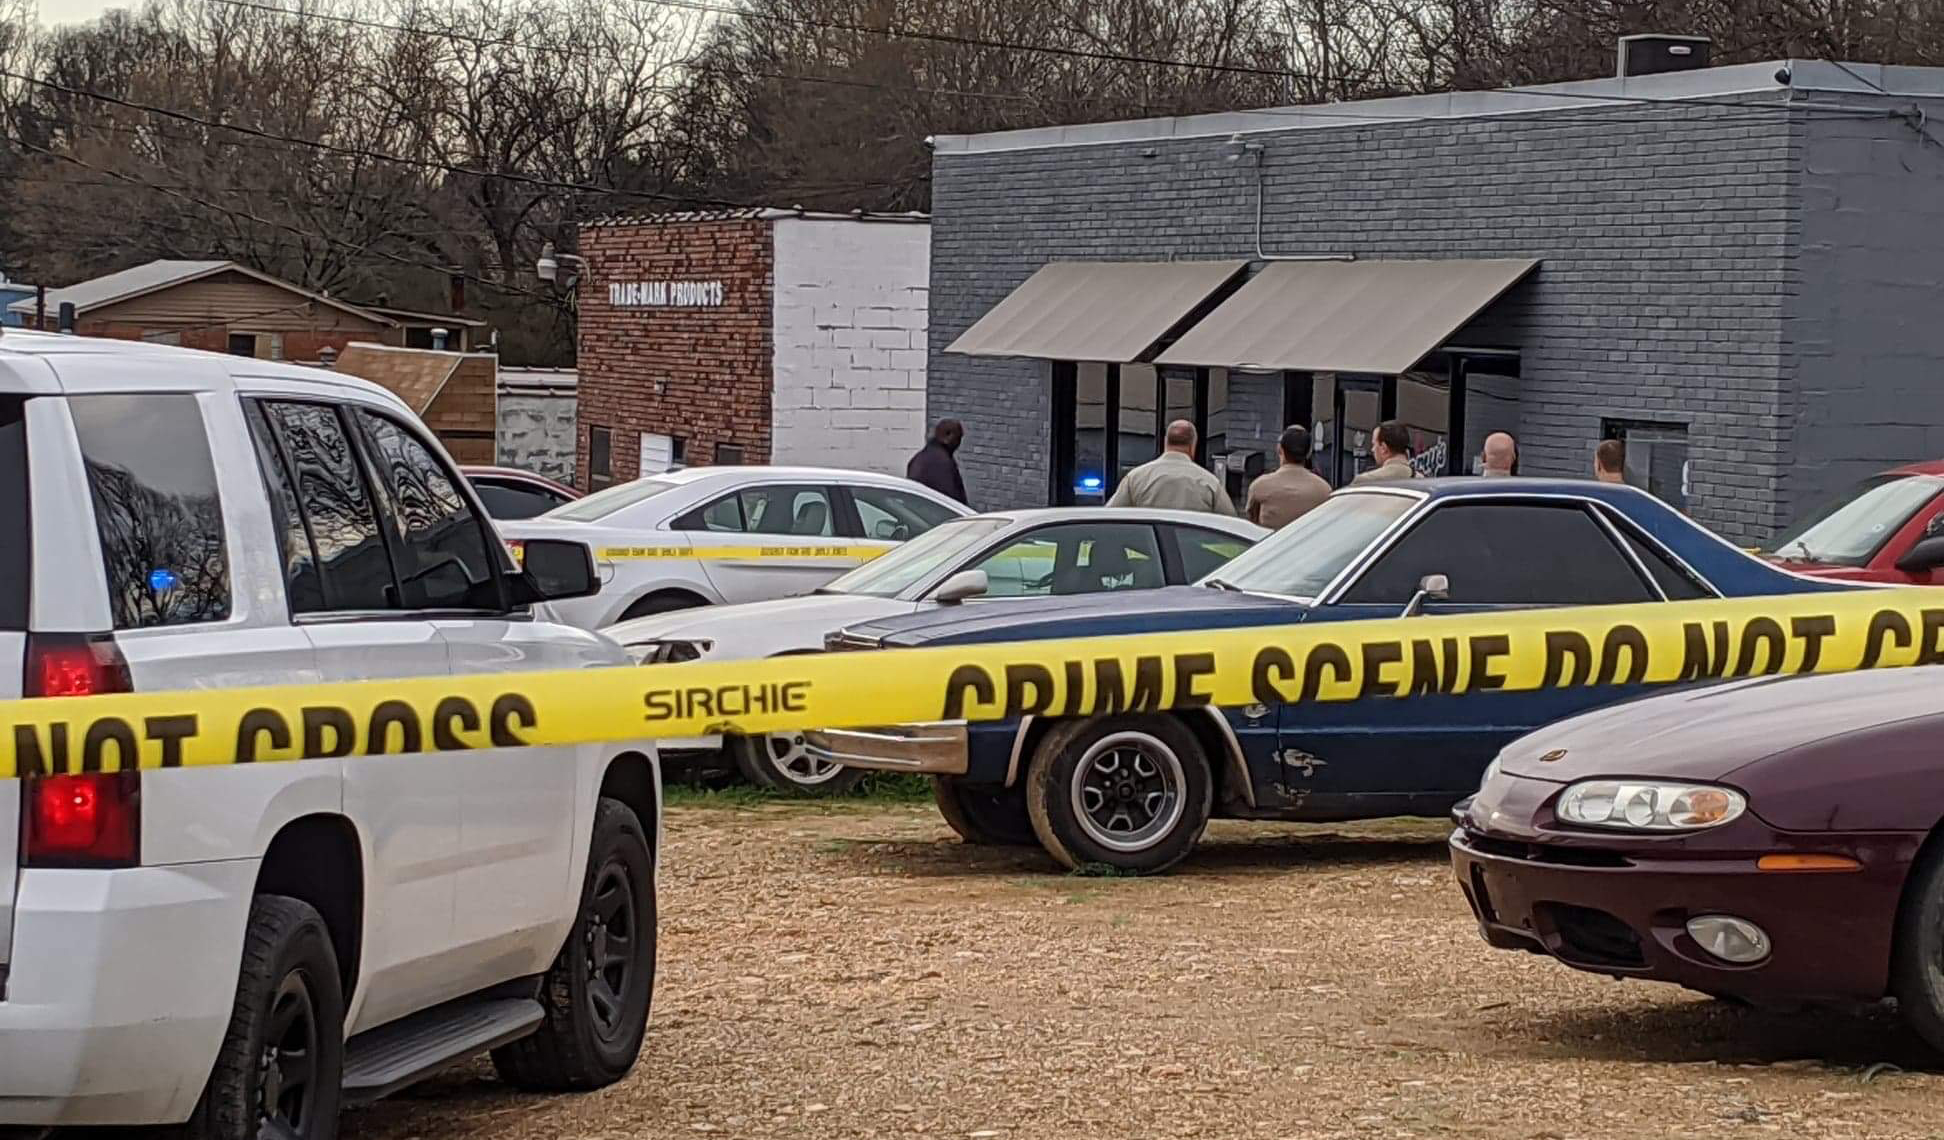 Grayson Valley man identified as victim in deadly Center Point barber shop shooting